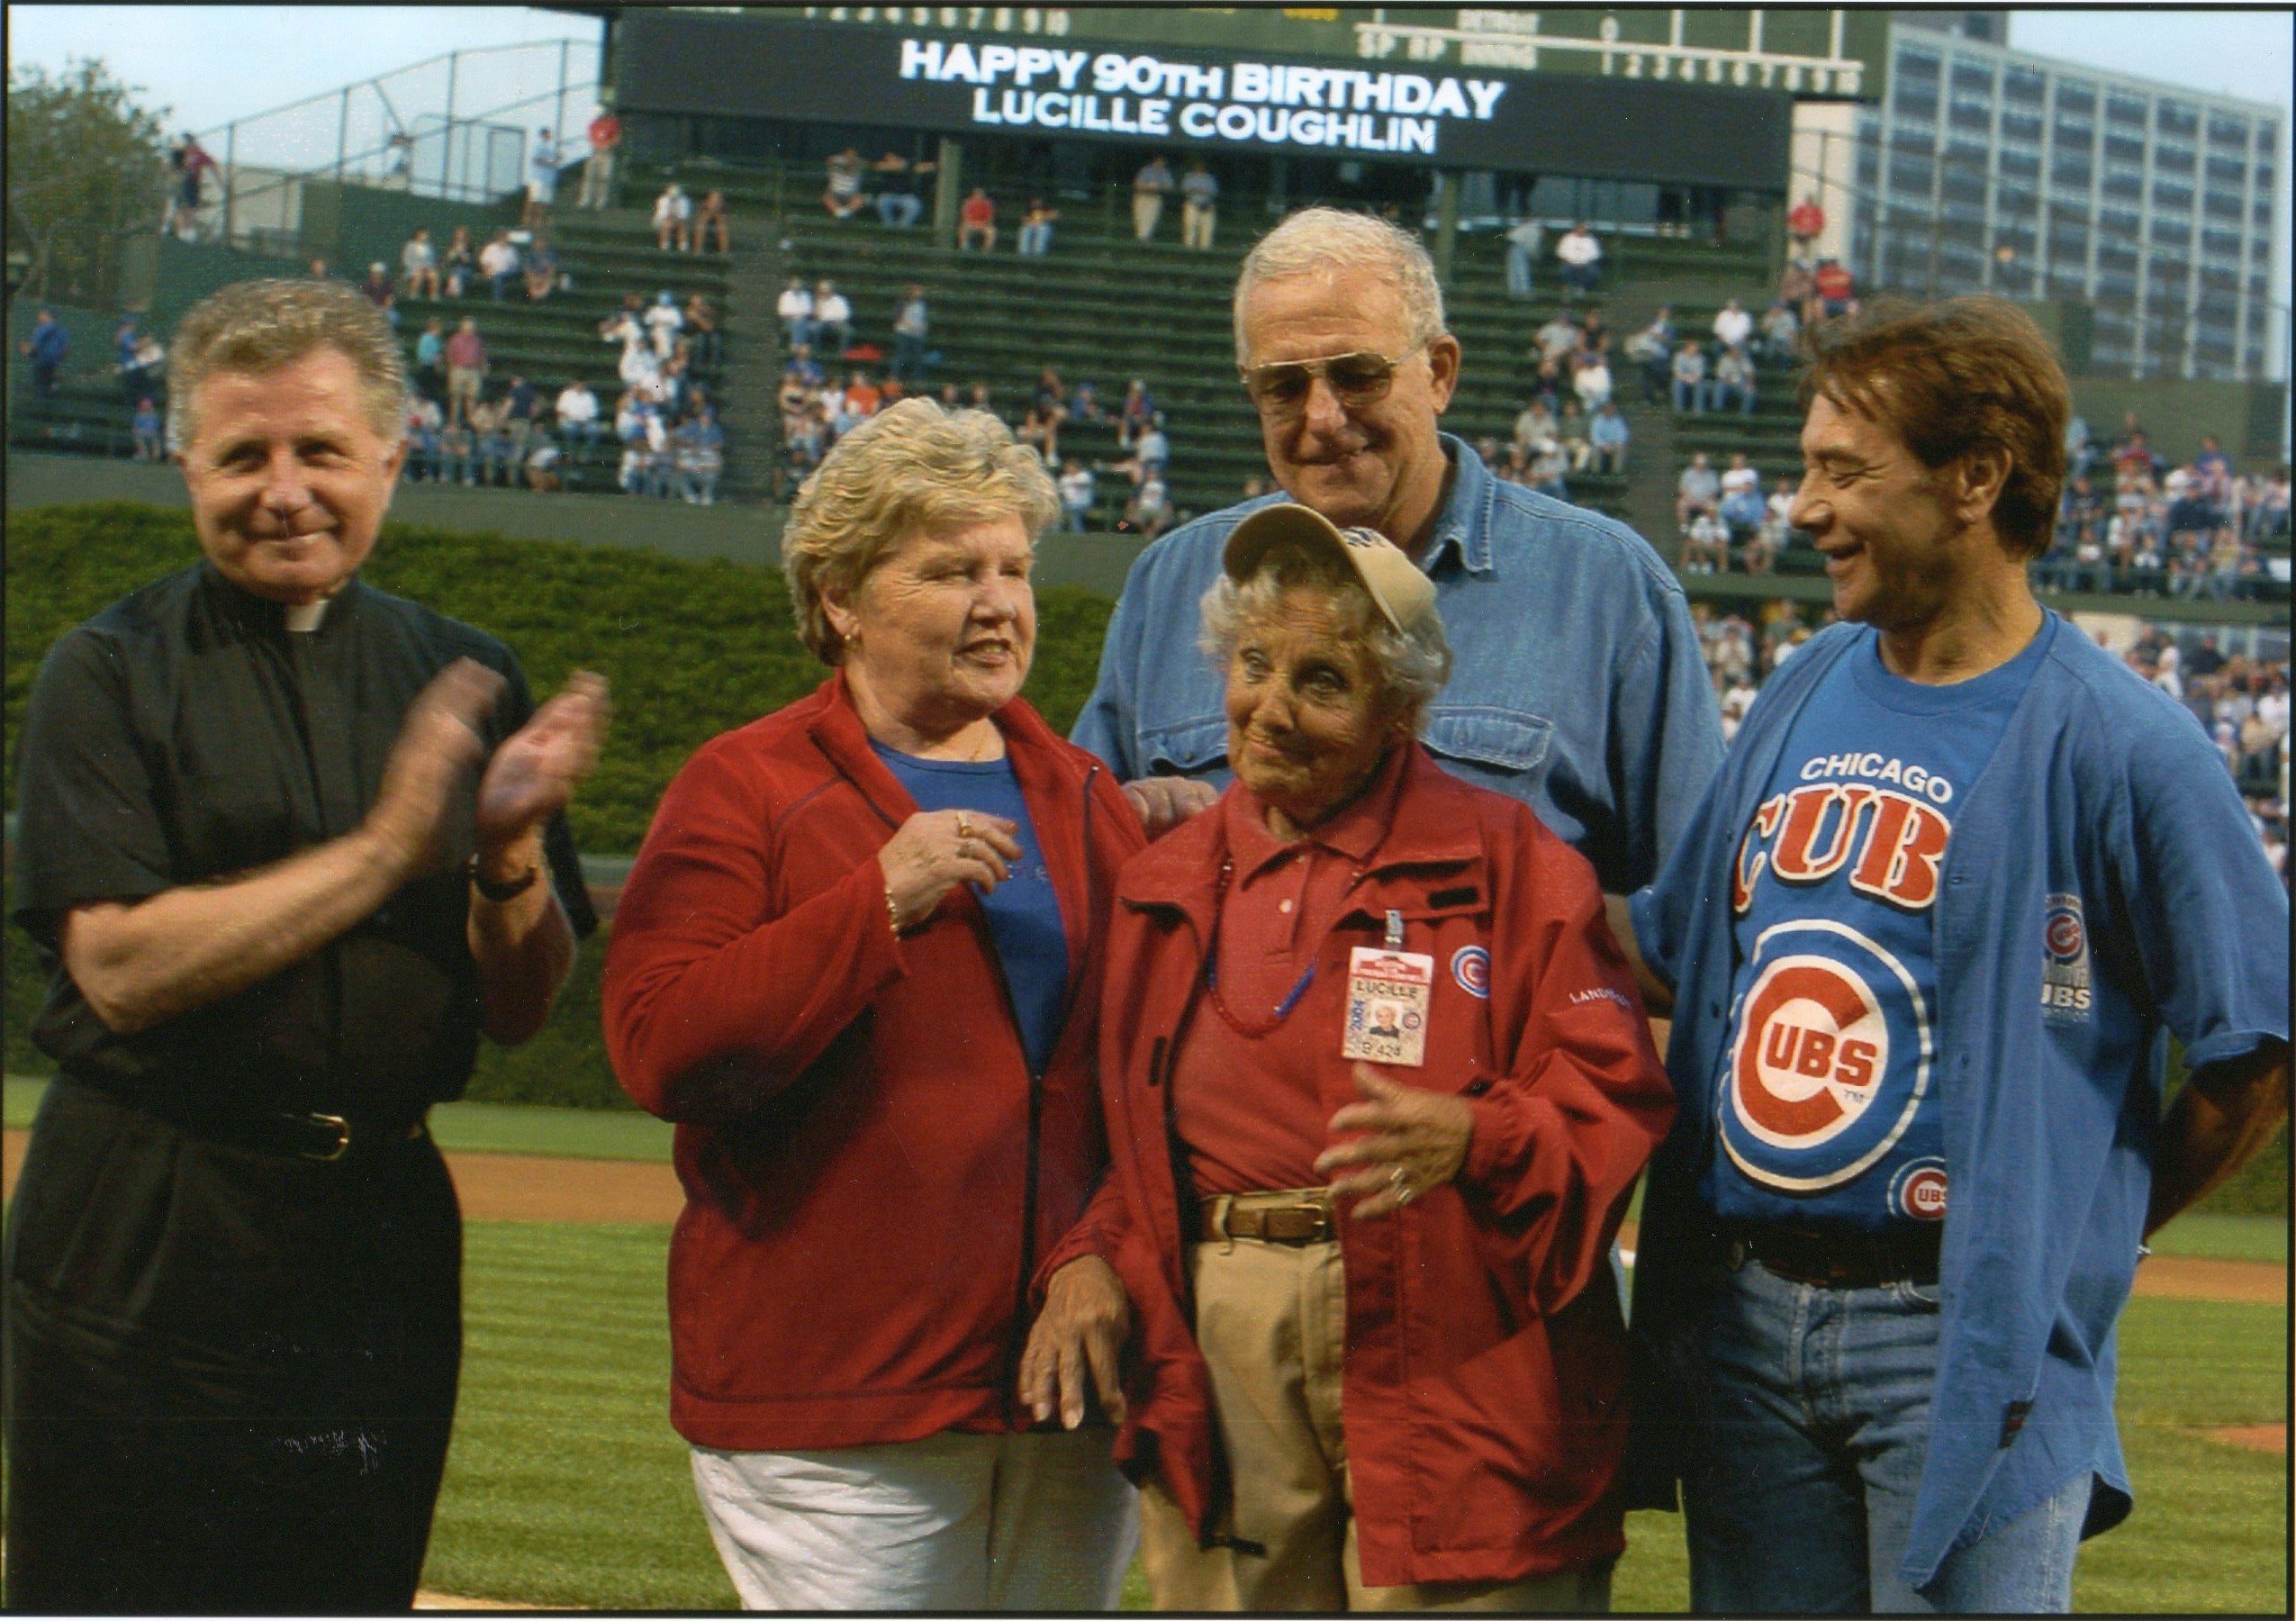 Lucille is celebrated on Wrigley Field on her 90th birthday